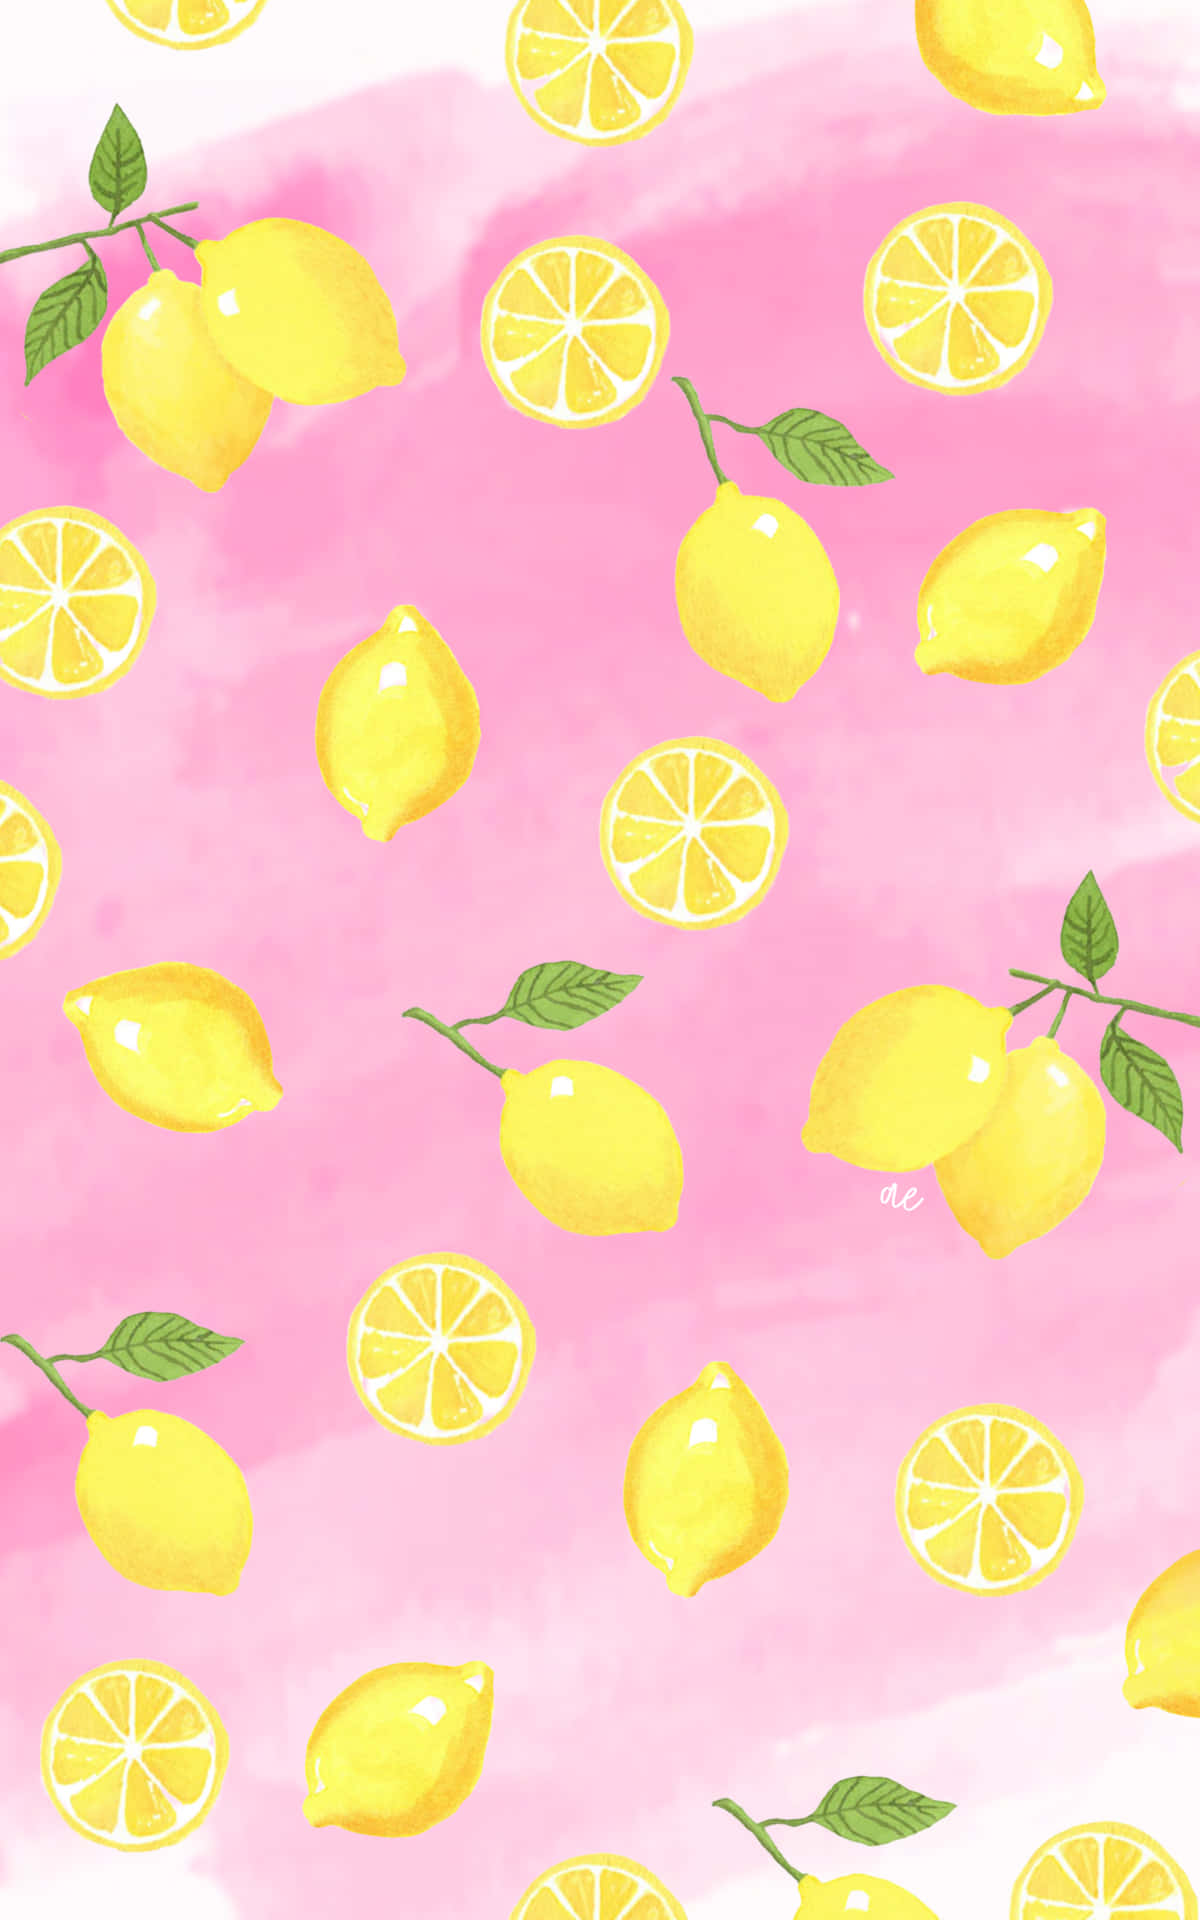 "Recharge Your Life with Lemon Iphone" Wallpaper